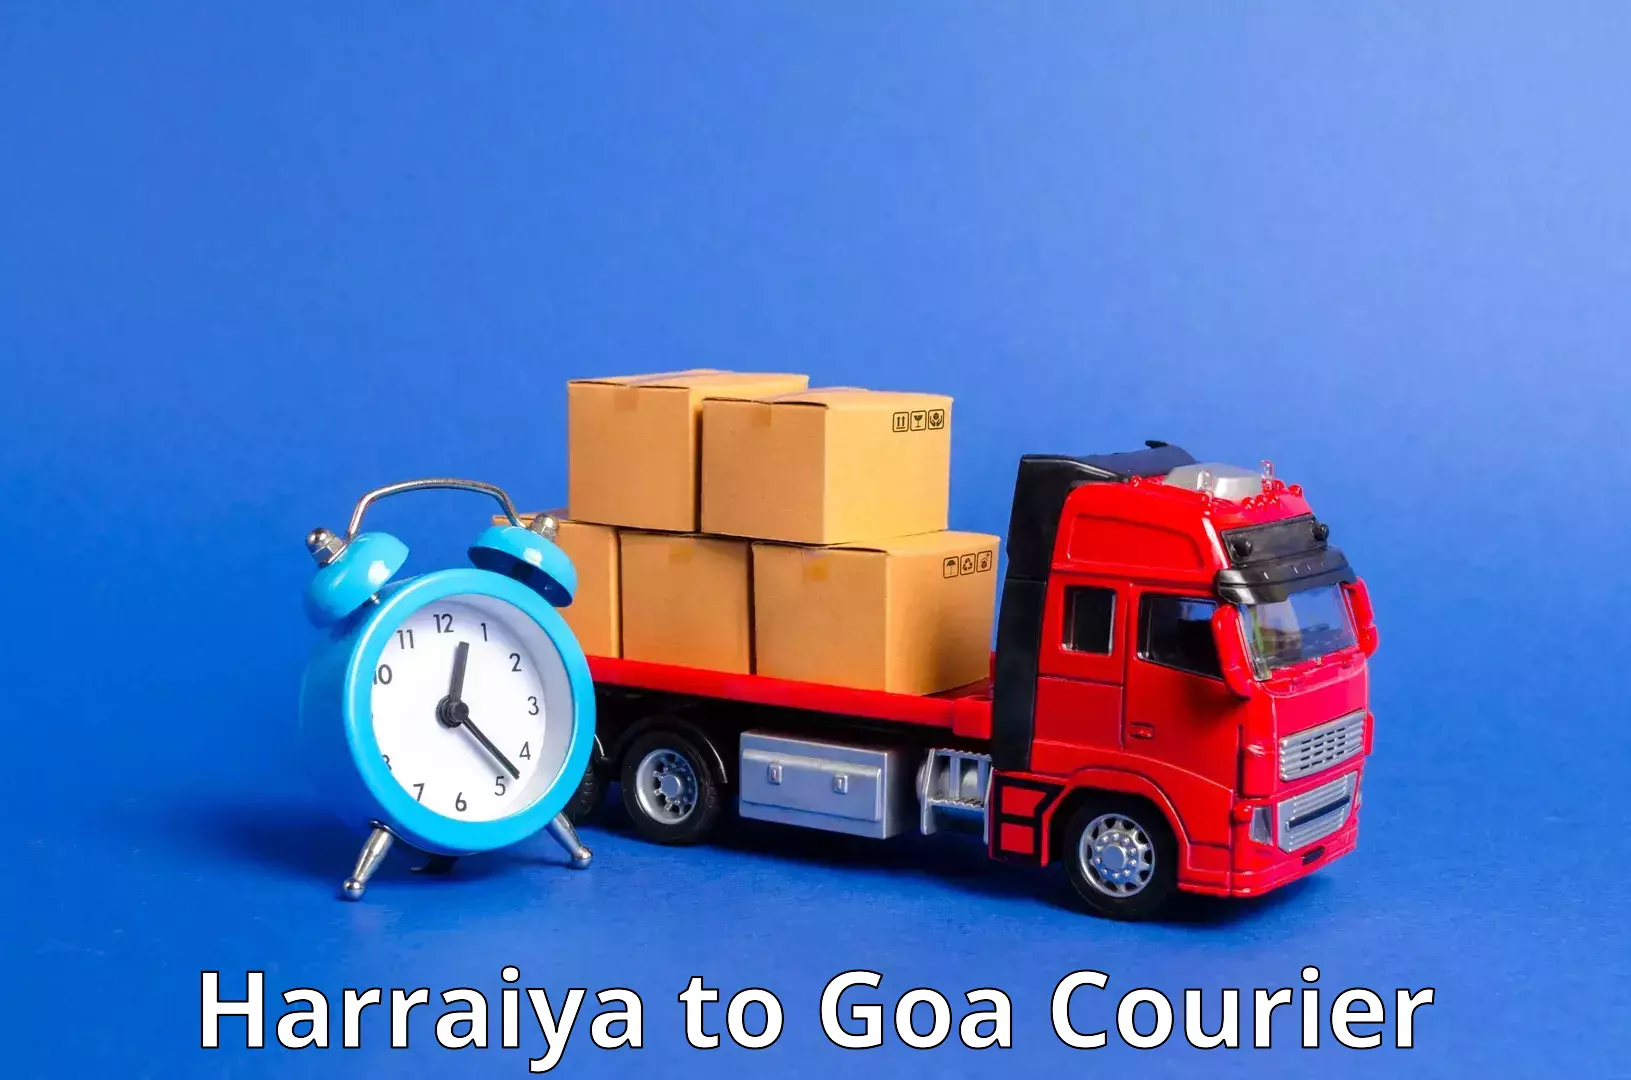 Express package services Harraiya to Goa